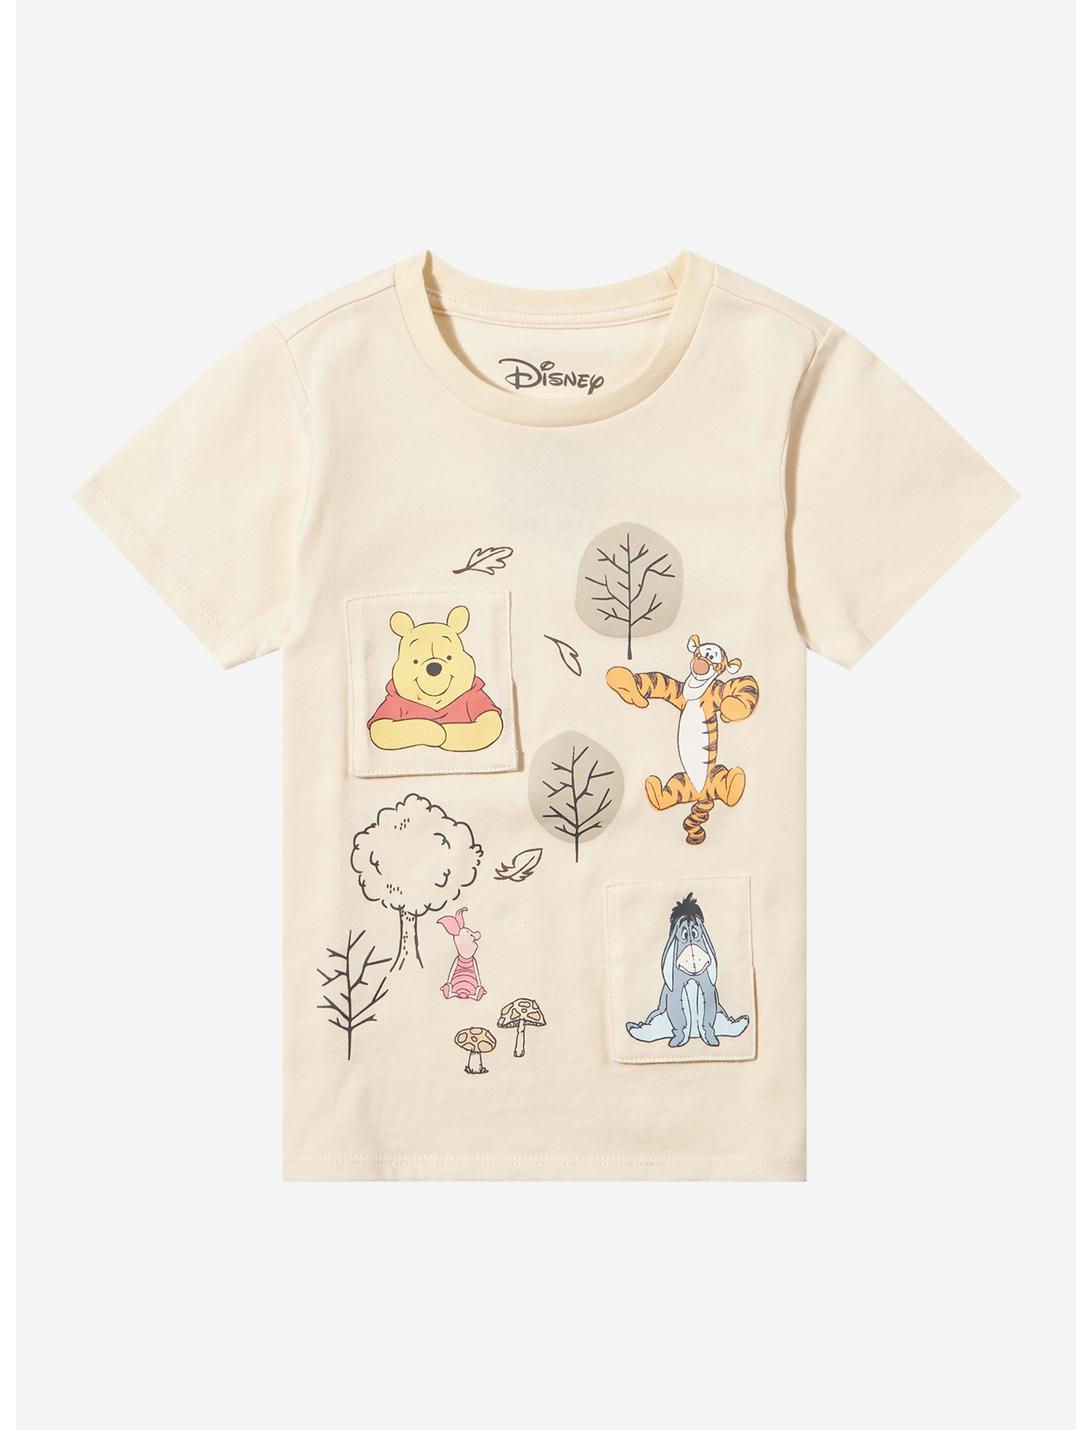 Disney Winnie the Pooh and Friends Flip Toddler T-Shirt - BoxLunch Exclusive, NATURAL, hi-res